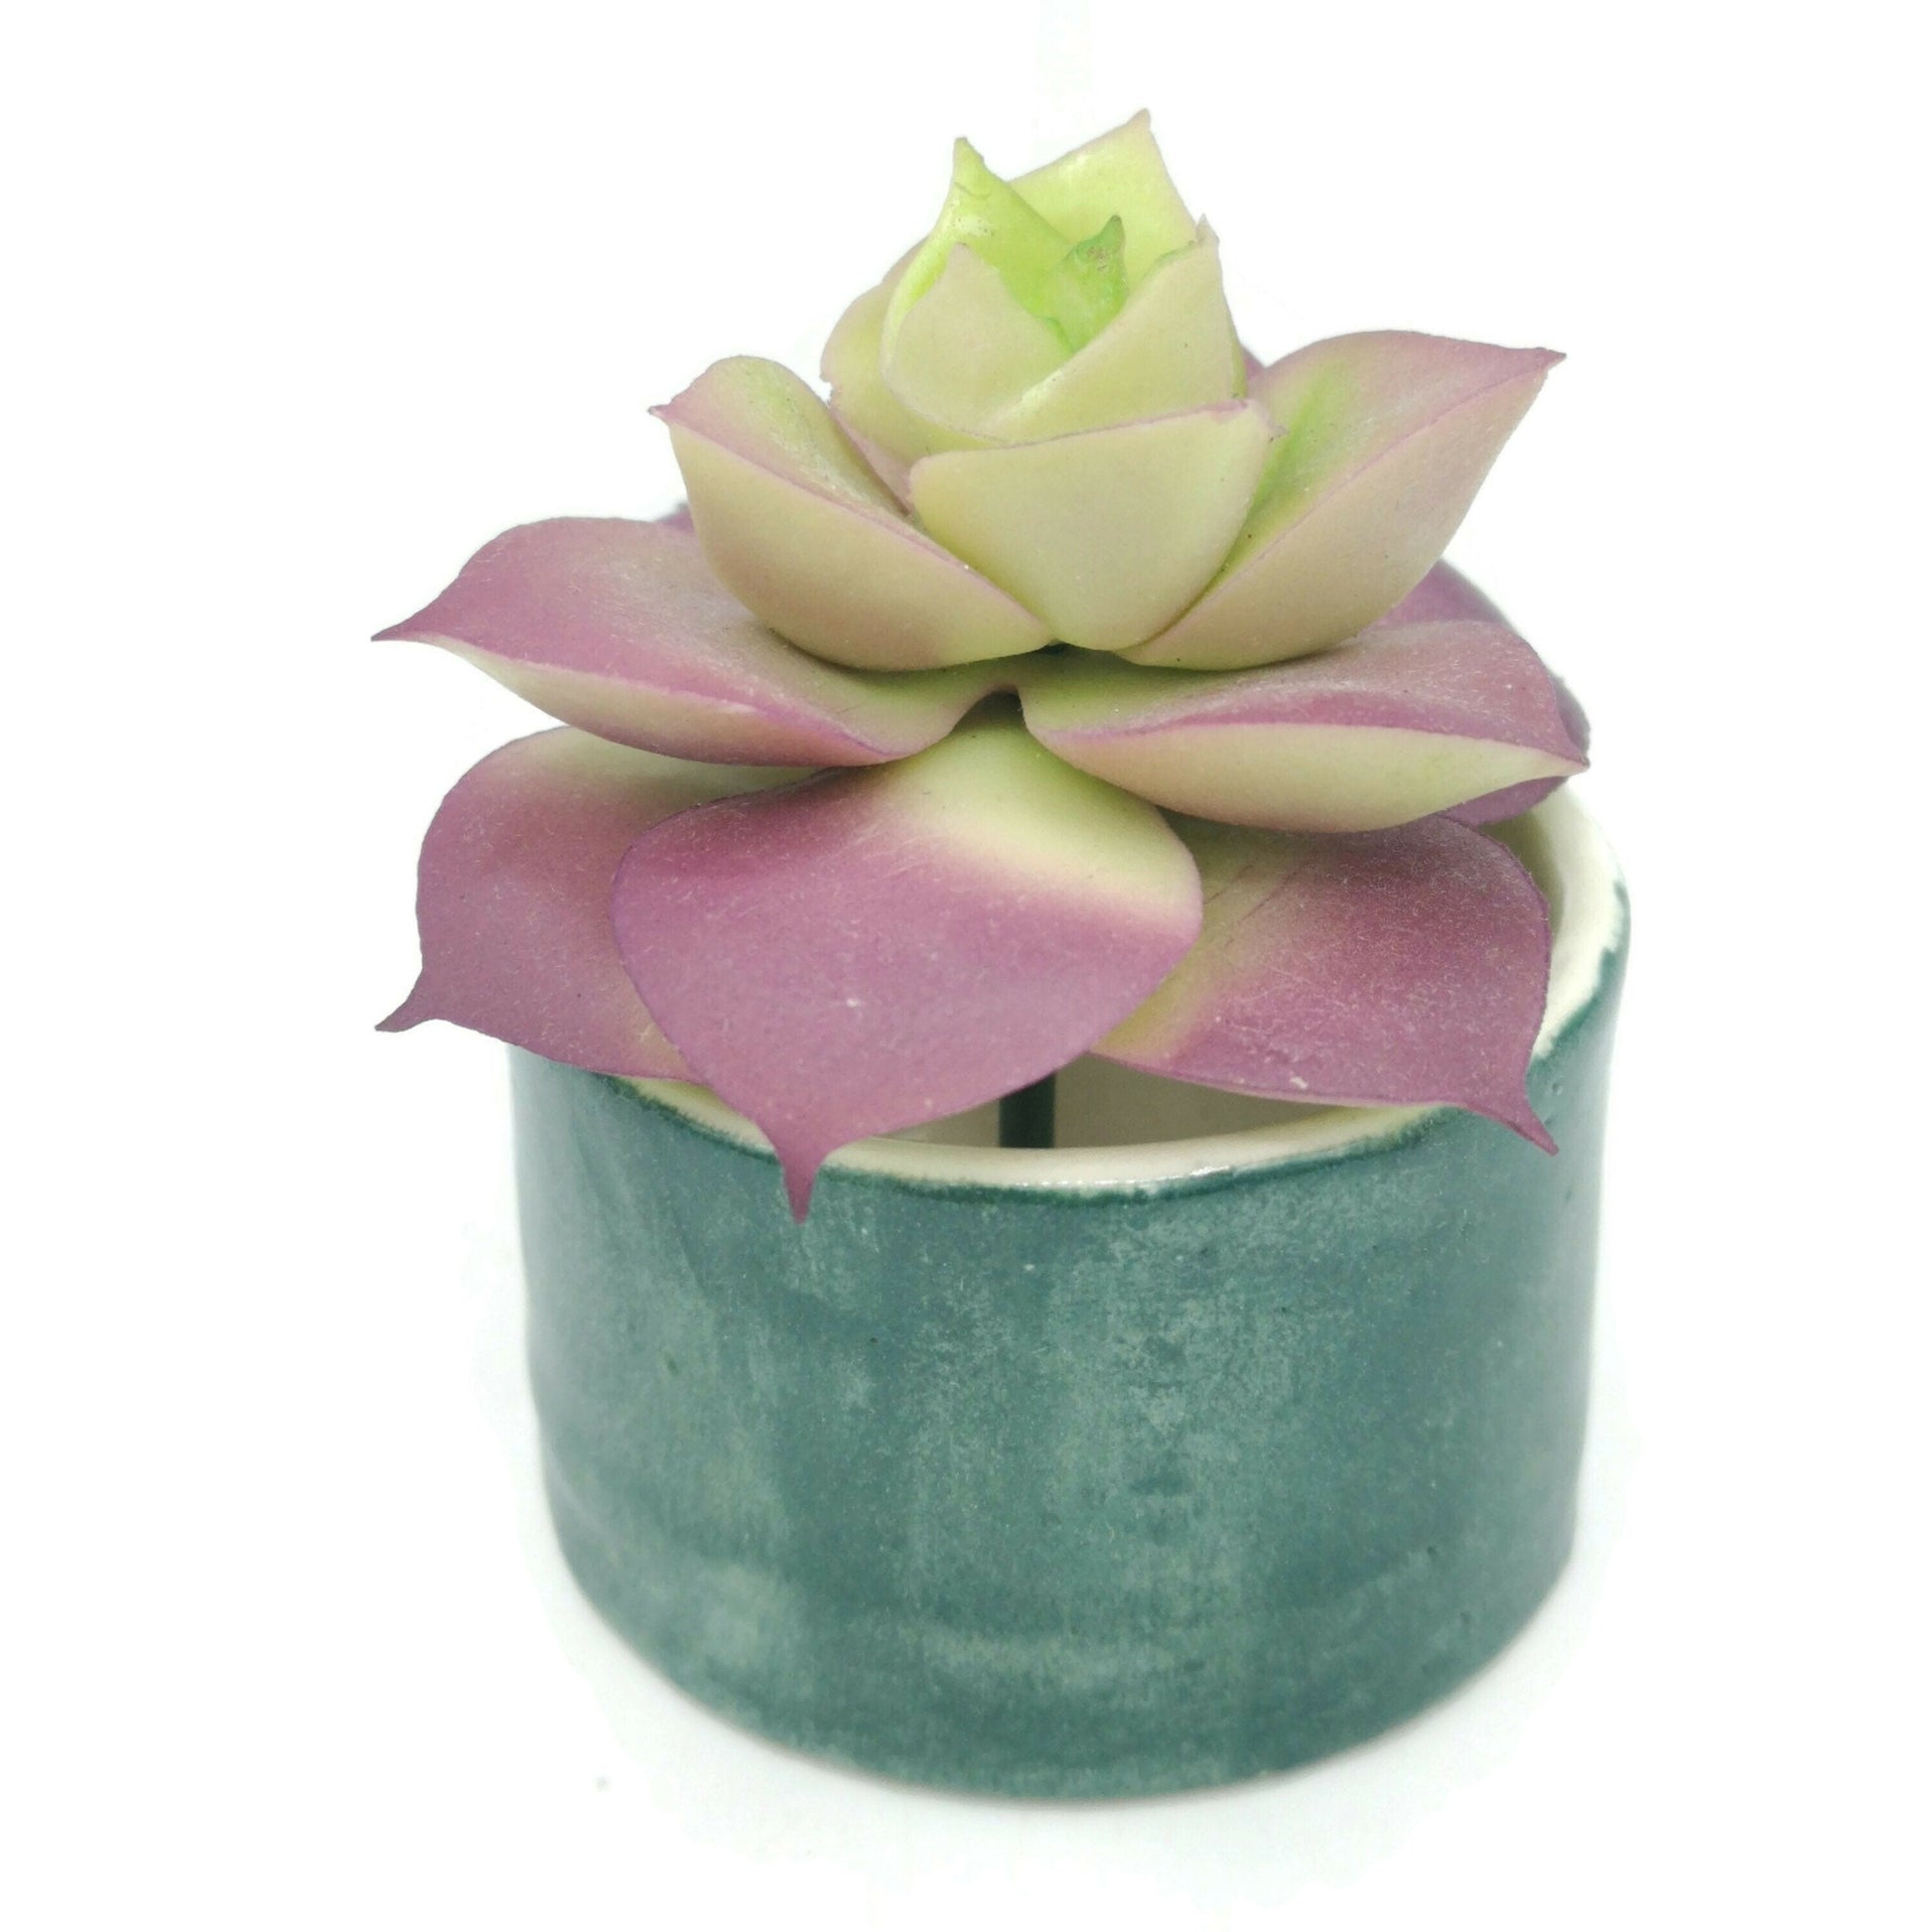 Handmade Ceramic Planter, Small Green Vase for Cactus or Succulents, Mom Birthday Gift From Daughter, Office Desk Accessories For Women - Ceramica Ana Rafael